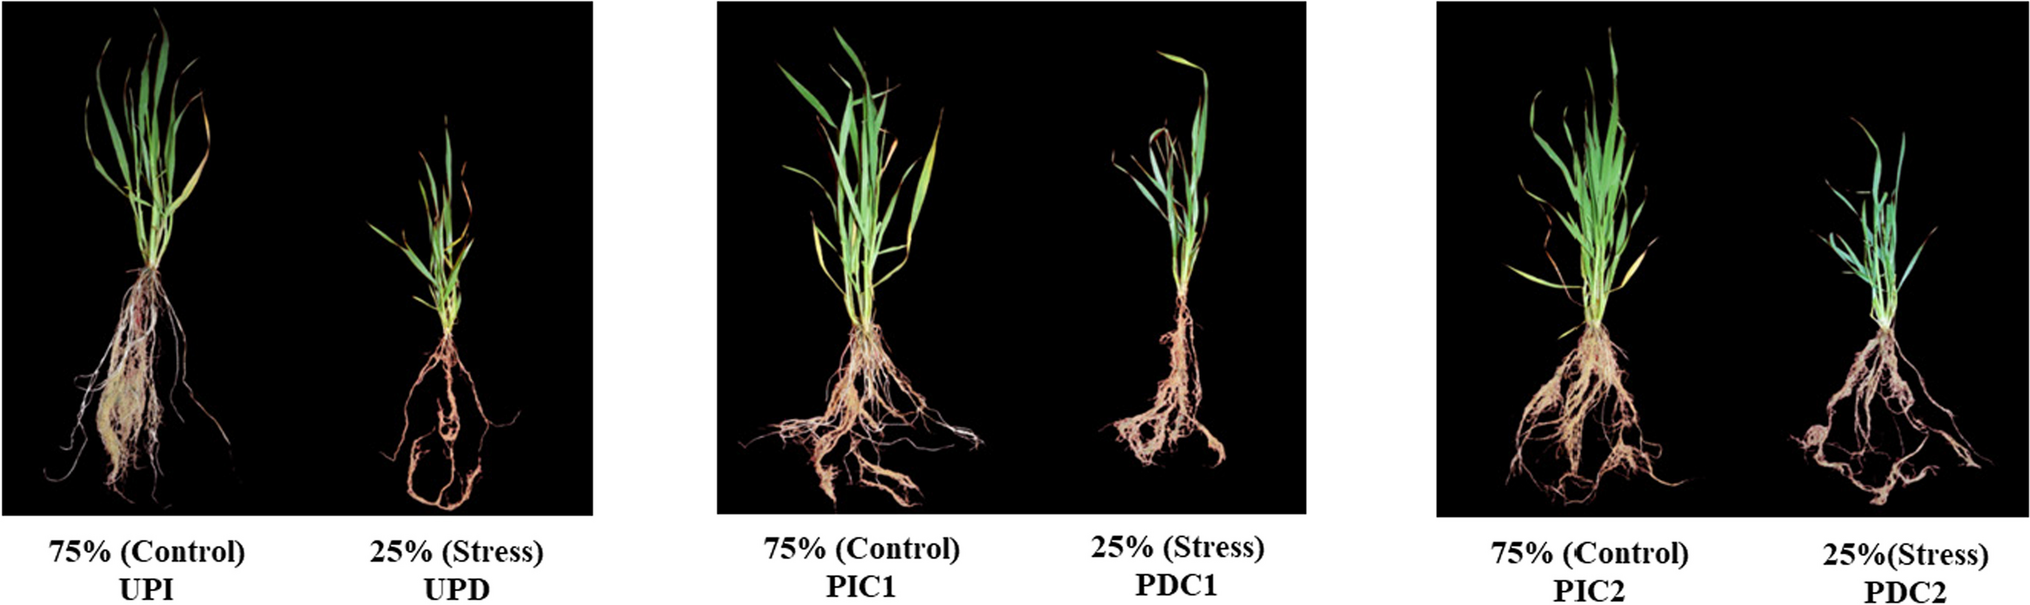 Priming of seeds with cyanobacteria improved tolerance in wheat (Triticum aestivum L.) during post-germinative drought stress